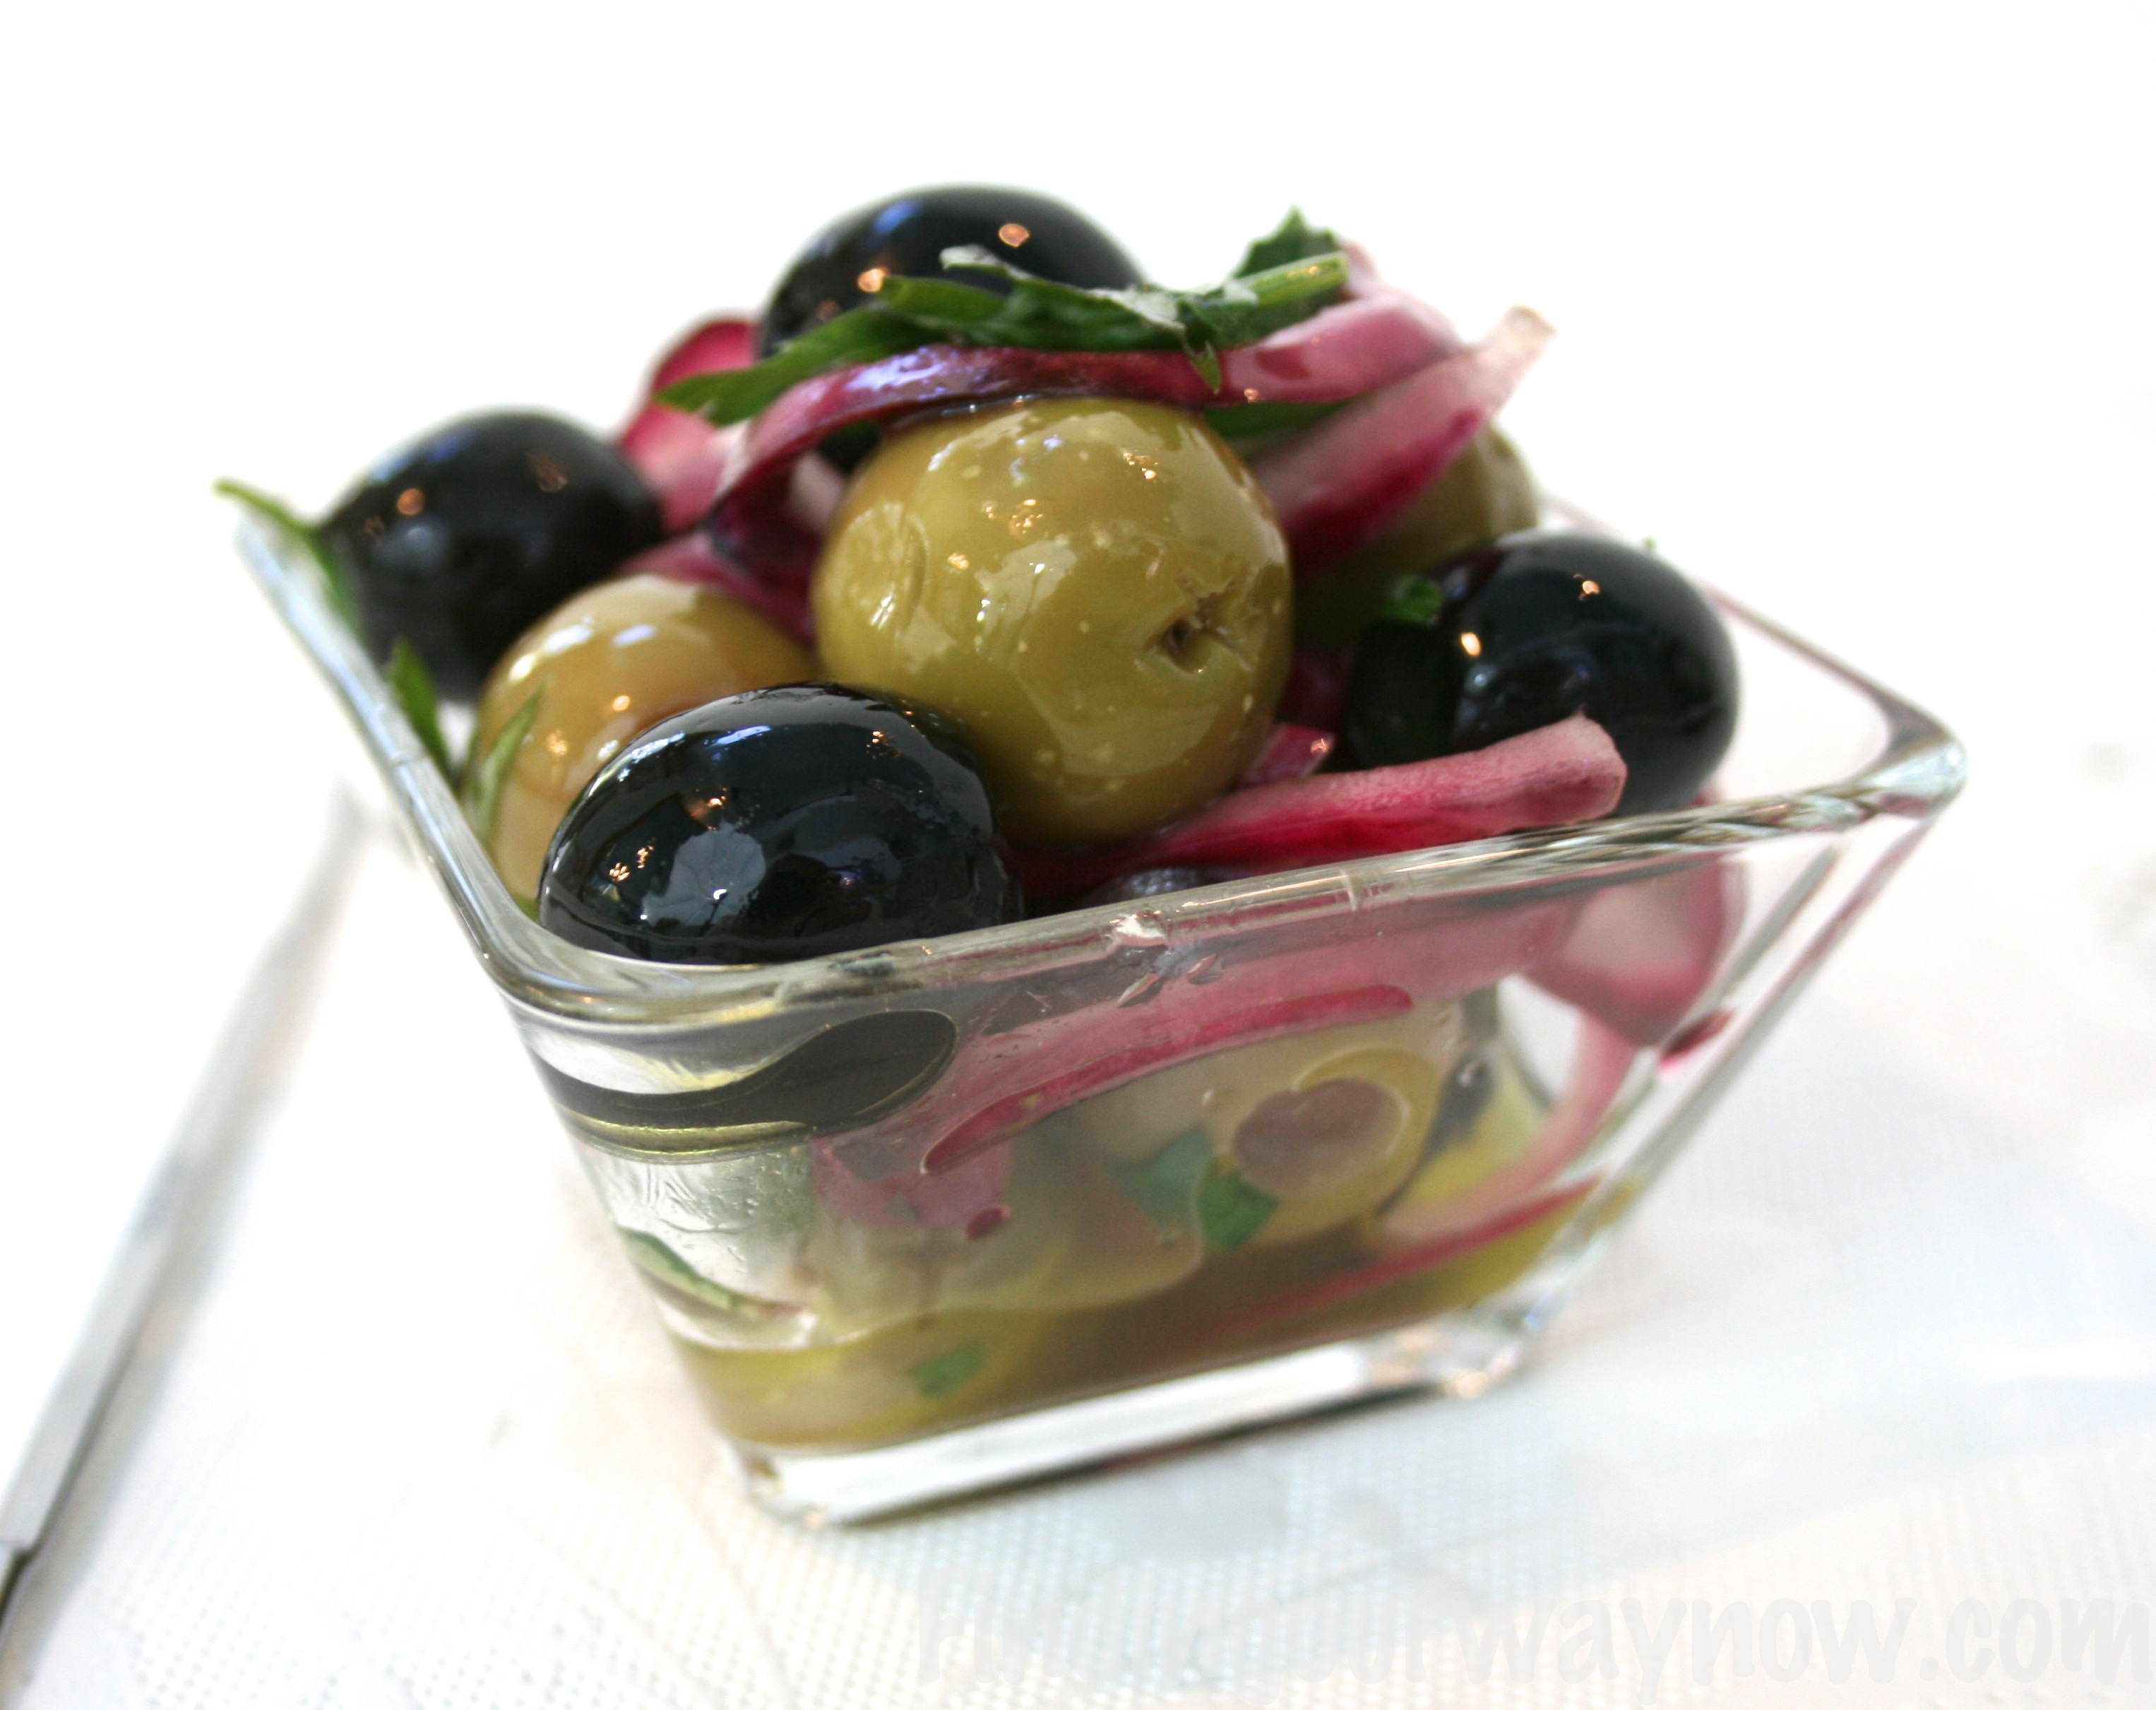 Garlic Olives For A Busy Cook: #Recipe - Finding Our Way Now